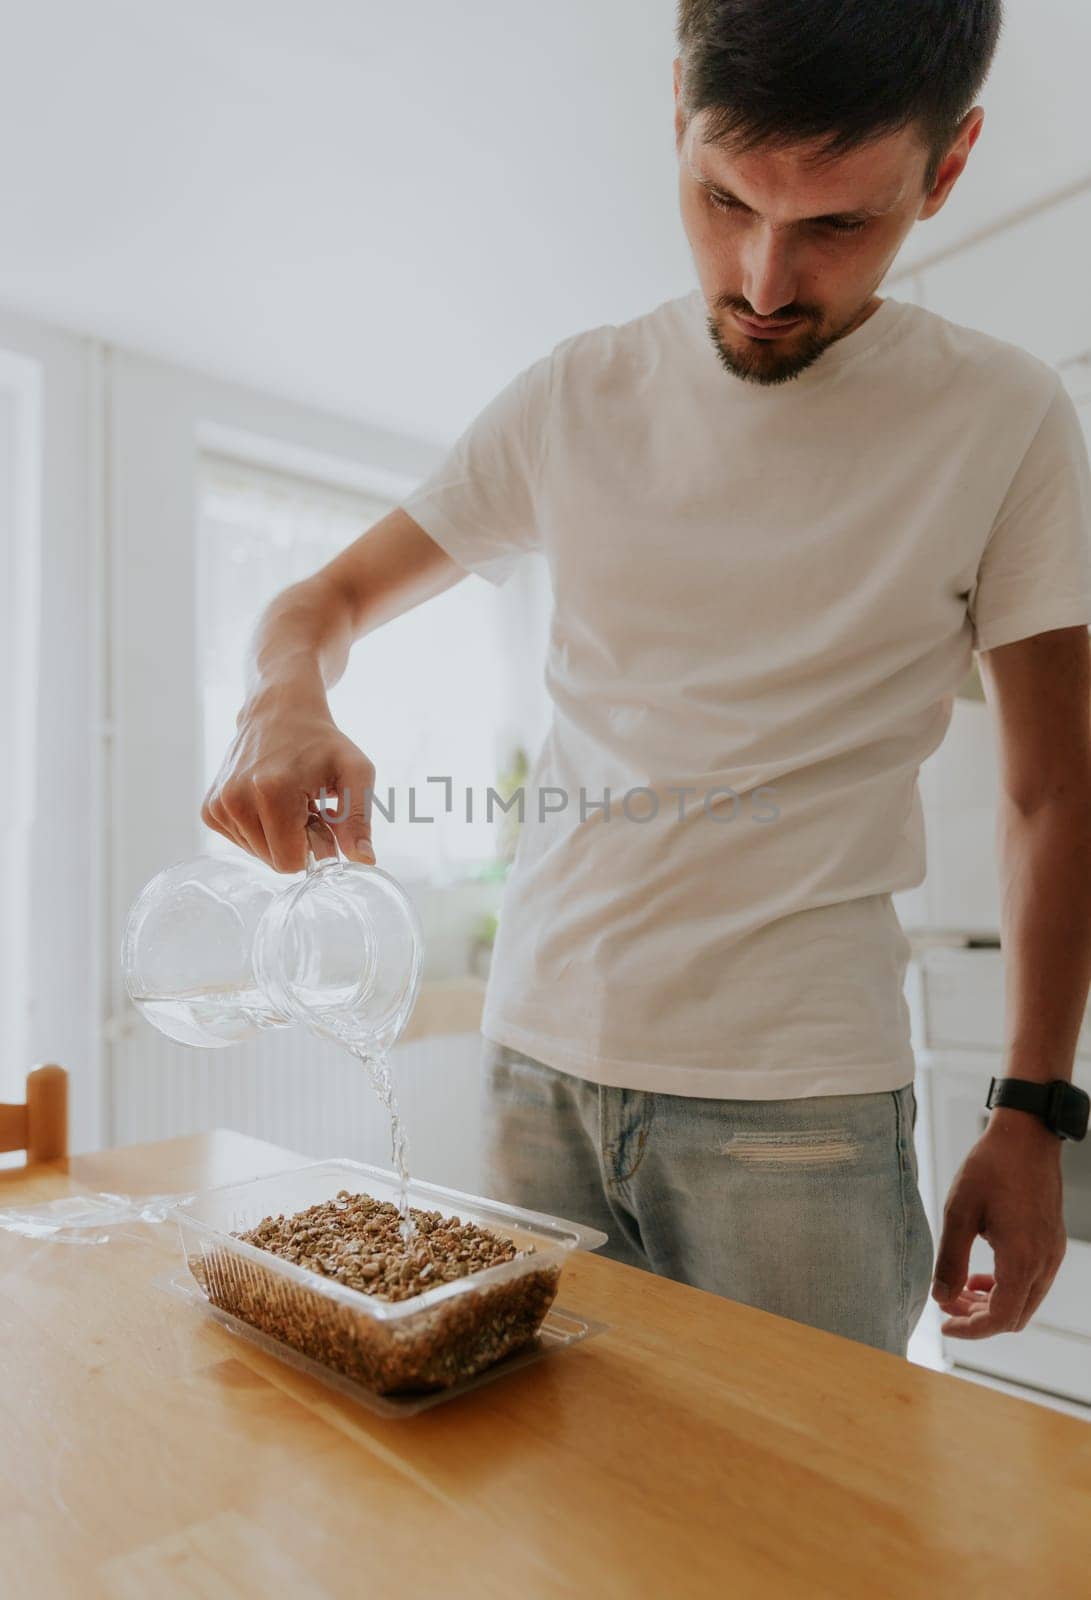 A young man waters wheat seeds into a container. by Nataliya